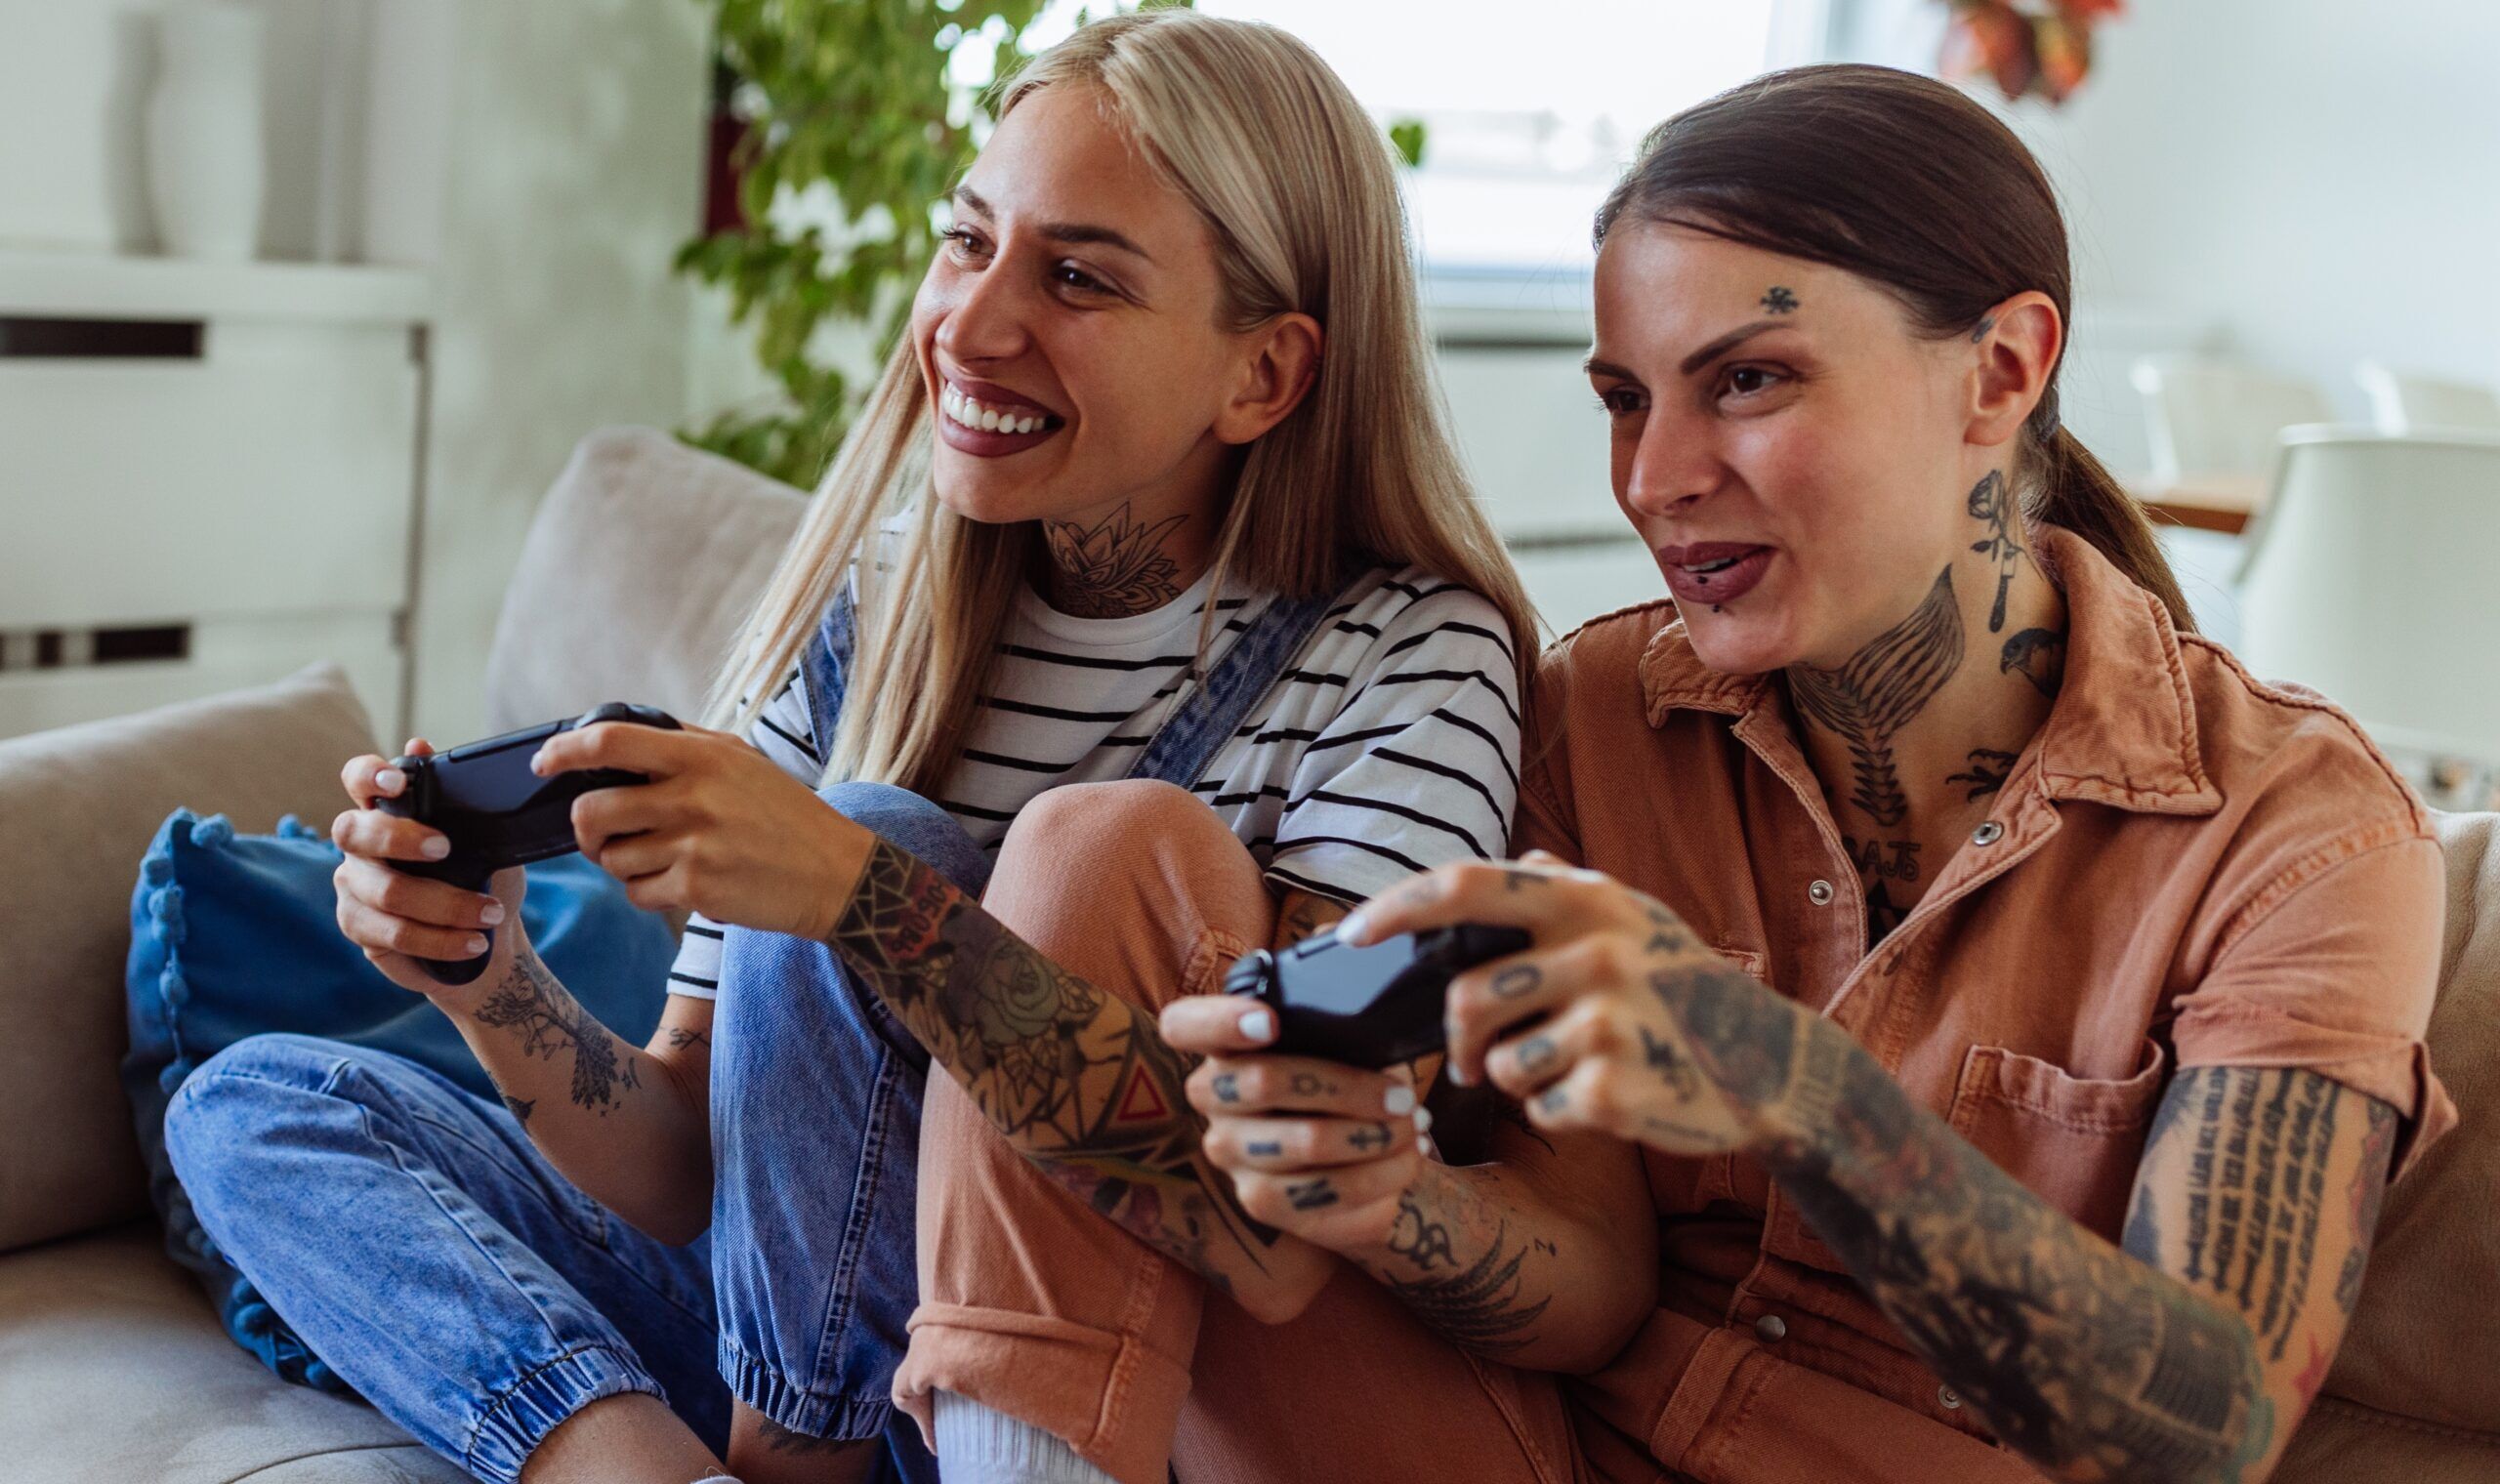 Cheerful lesbian couple playing video games together while being seated on a sofa at home during the day